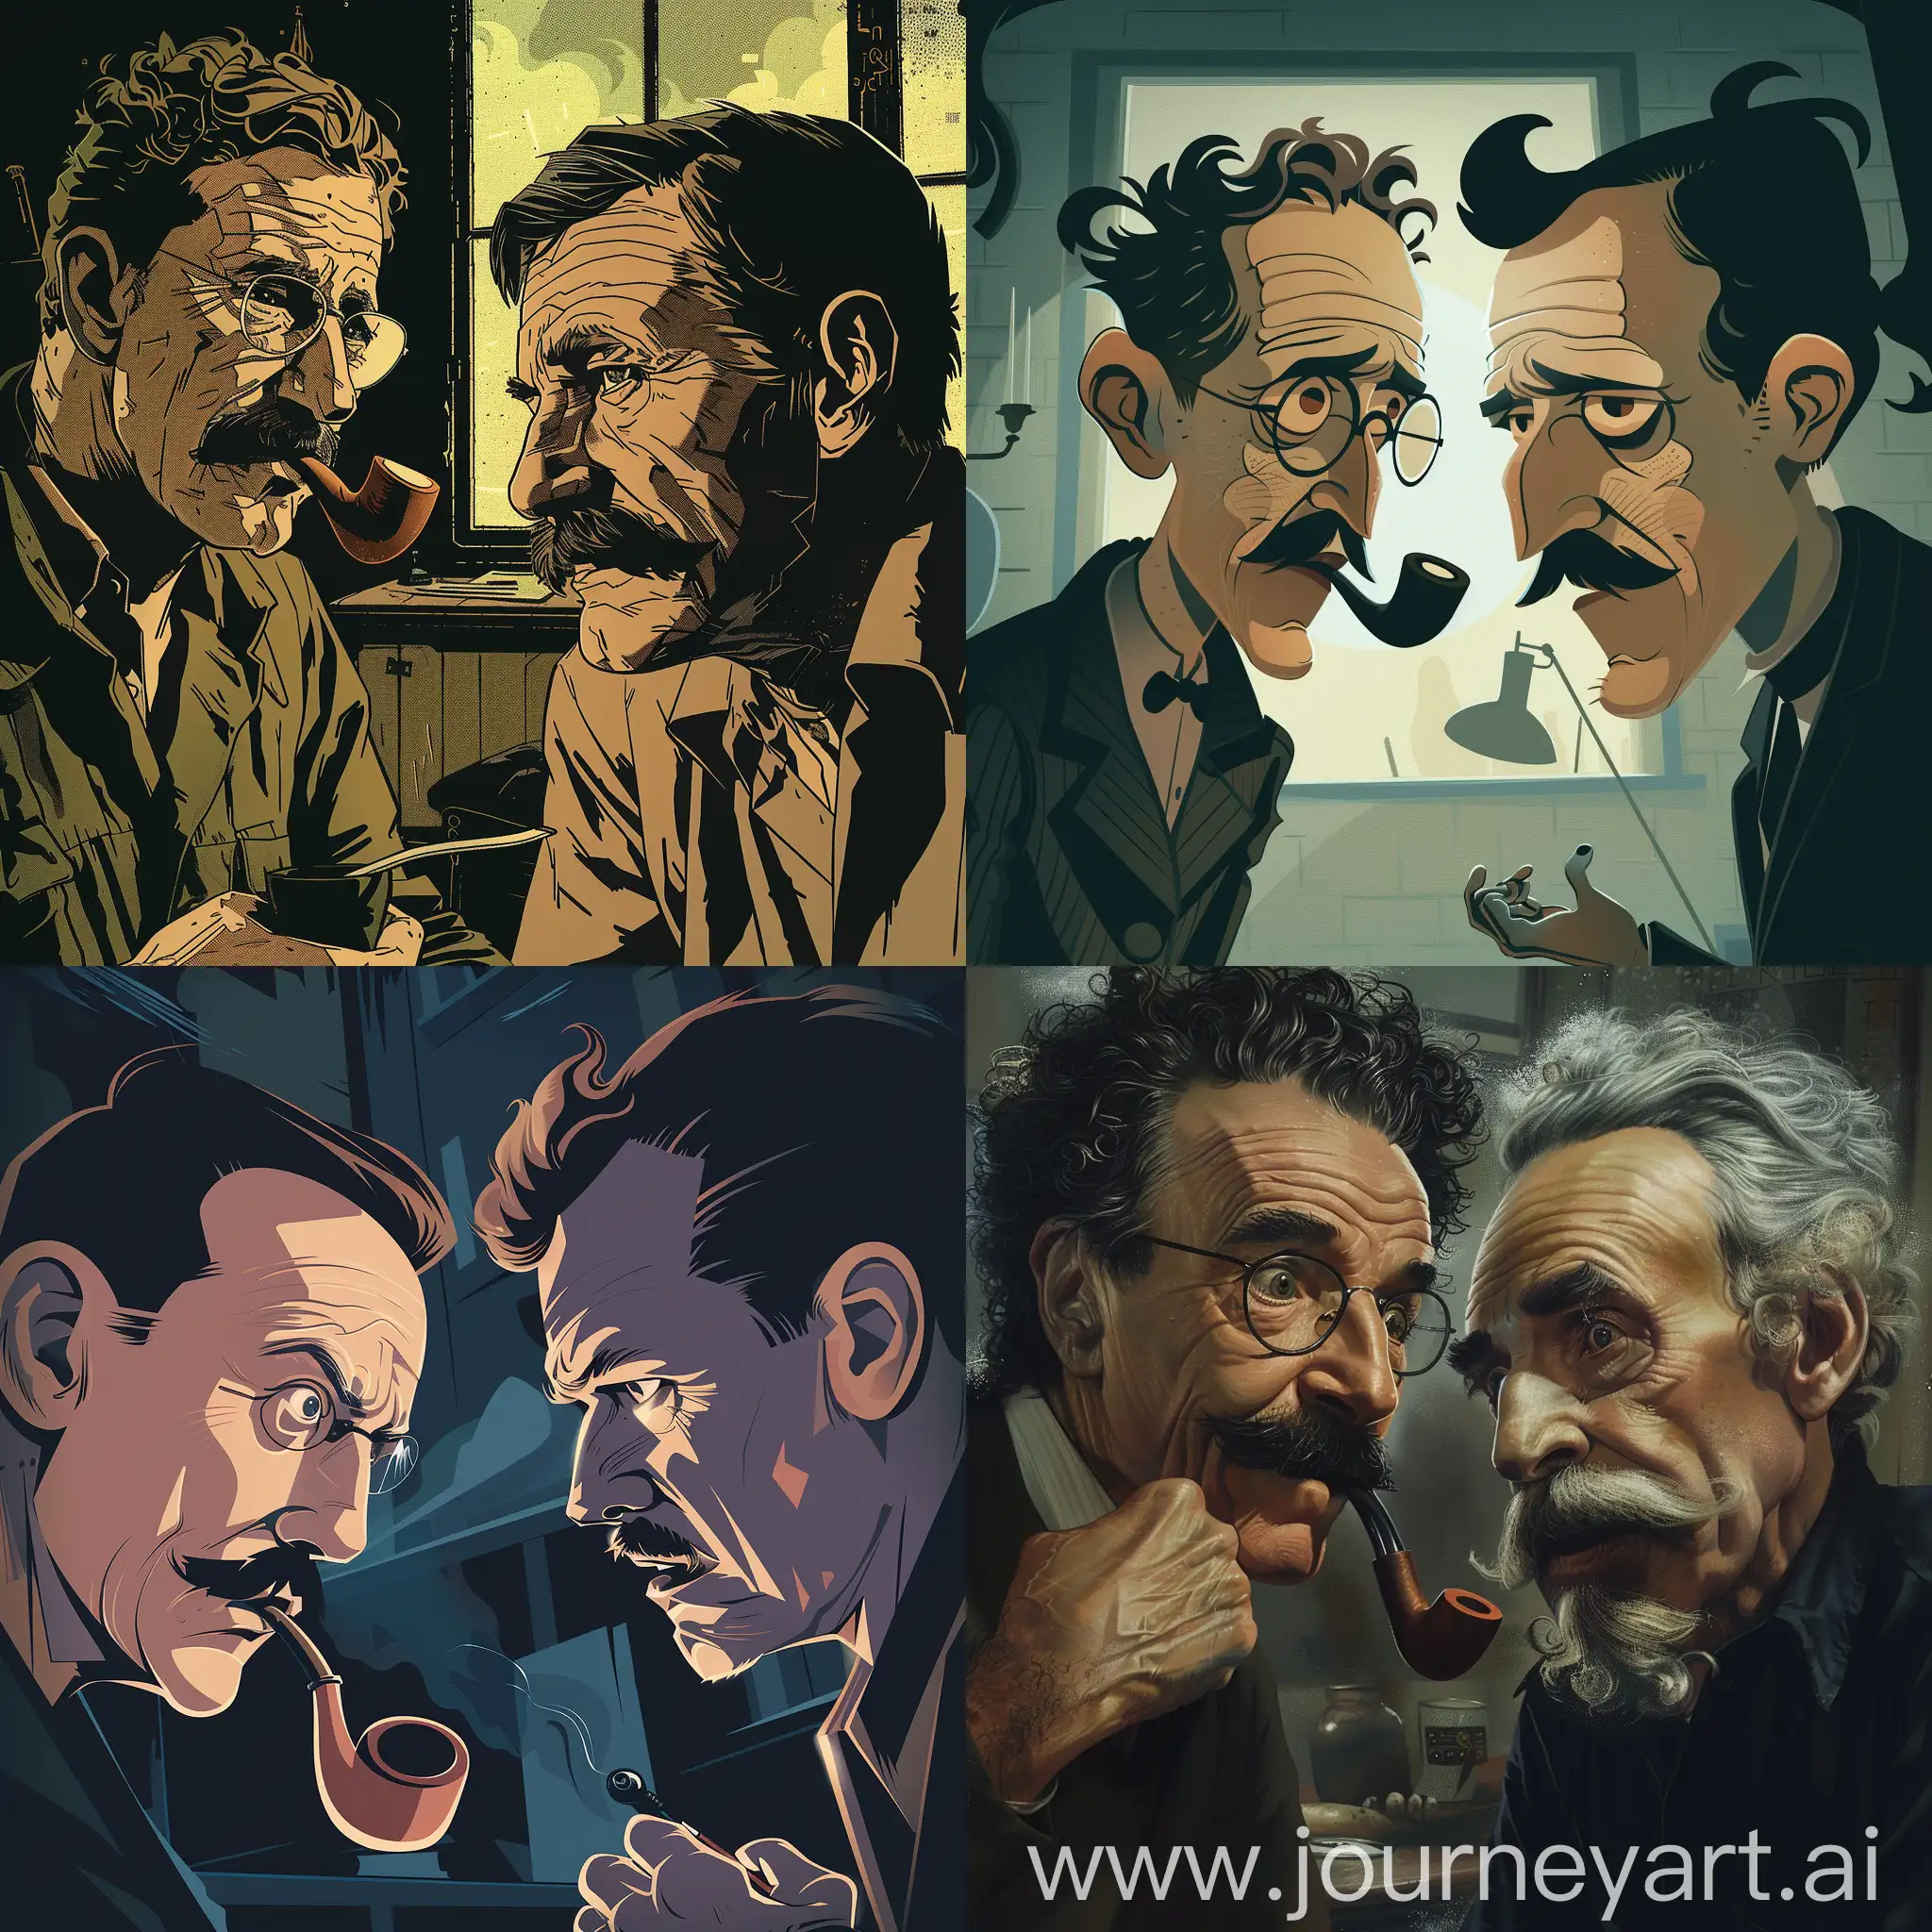 "Generate an image portraying an animated discussion between Jean-Paul Sartre and Friedrich Nietzsche. Highlight Sartre's characteristic pipe and pensive expression, ensuring his distinct features are prominent. Simultaneously, emphasize Nietzsche's intense gaze and unmistakable mustache. Place them in a setting that echoes their respective philosophical ideas, perhaps with subtle visual cues representing existentialism and eternal recurrence. Clarify the distinction between the two figures to create a compelling and accurate depiction of these iconic philosophers in conversation."